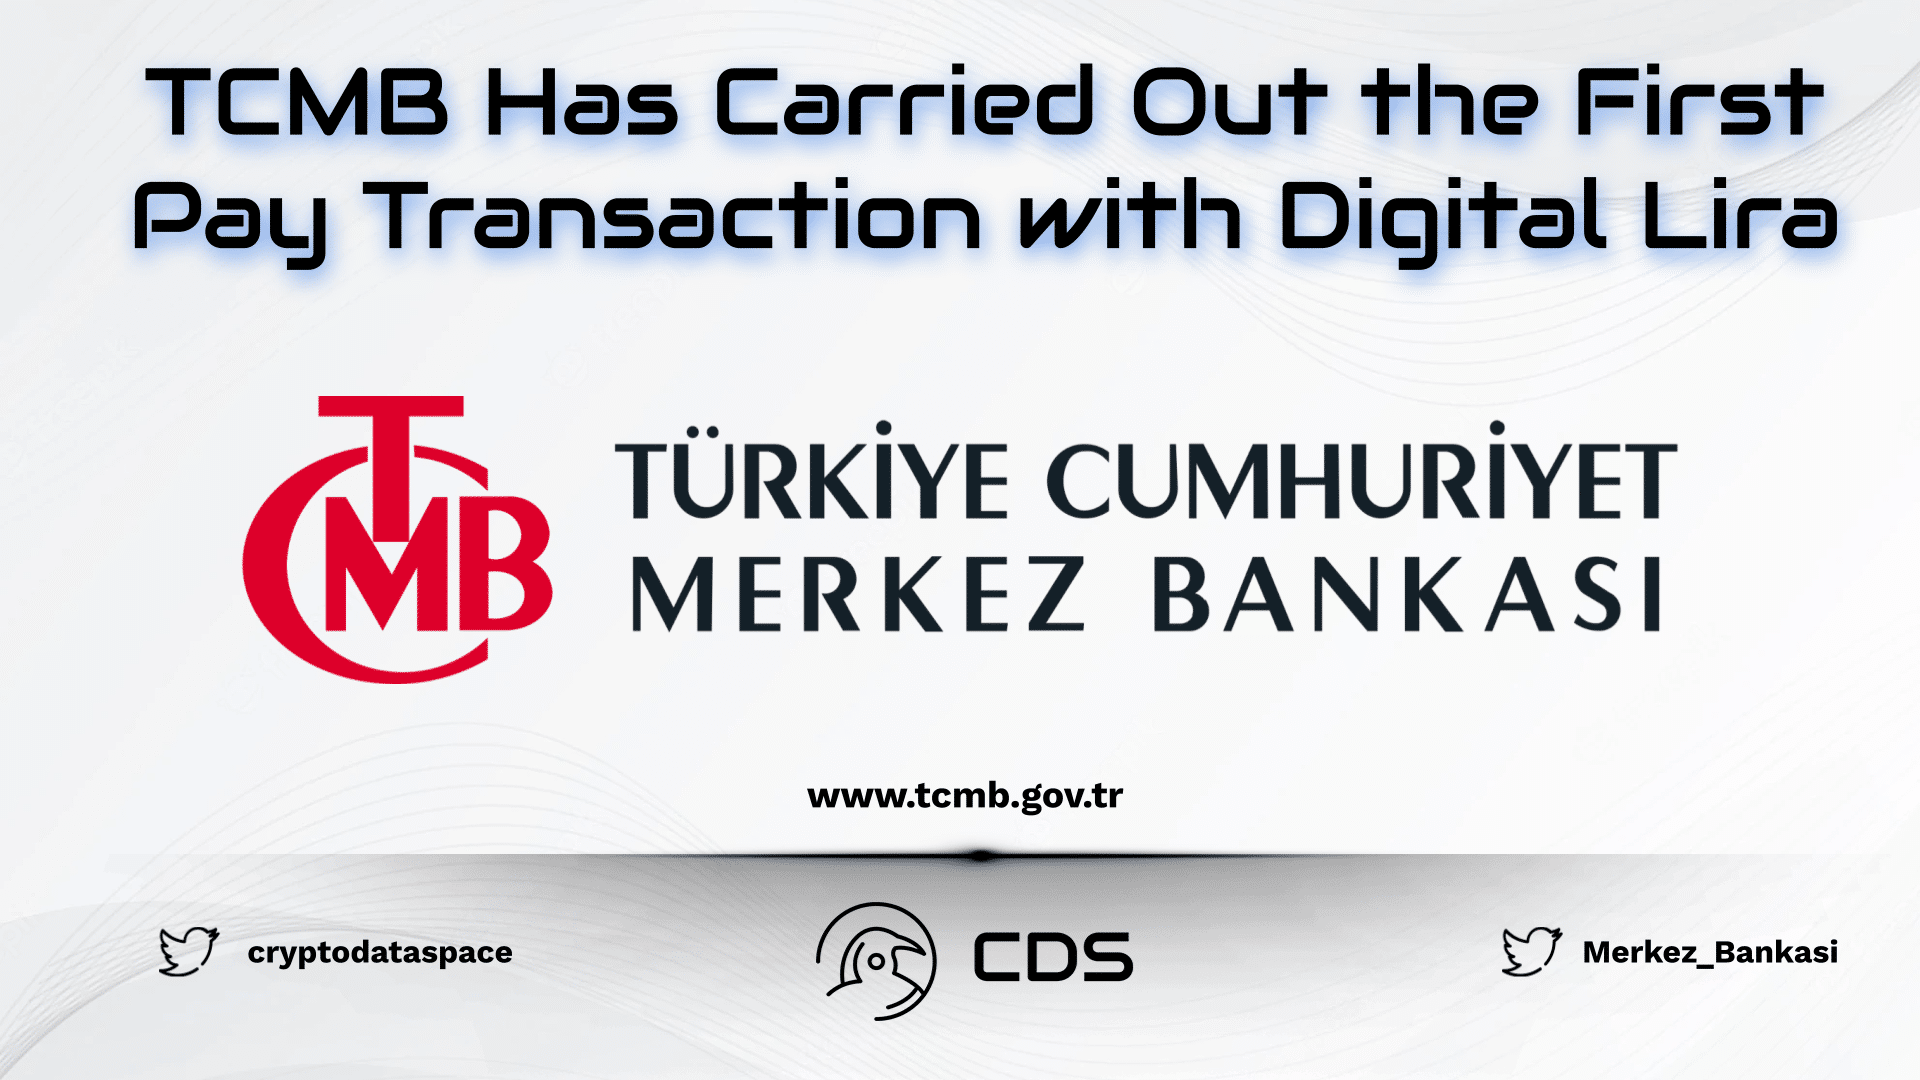 TCMB Has Carried Out the First Pay Transaction with Digital Lira